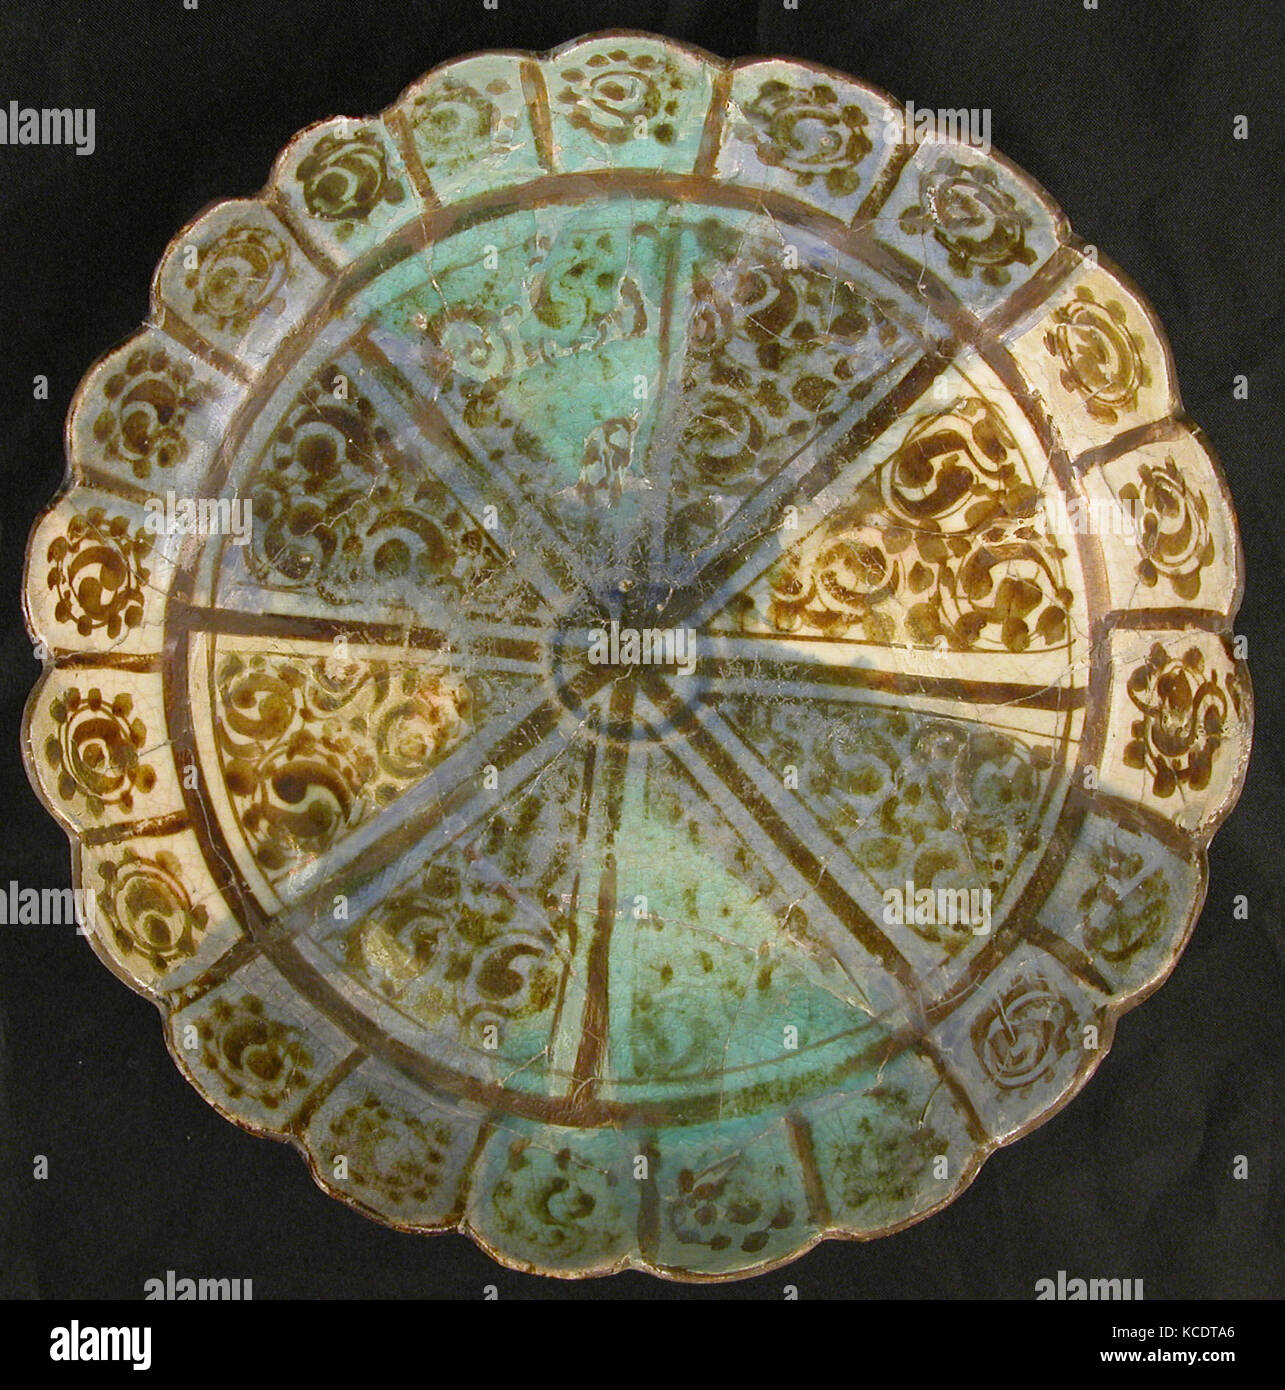 Dish with Scalloped Rim and Radial Pattern, 12th–early 13th century Stock Photo